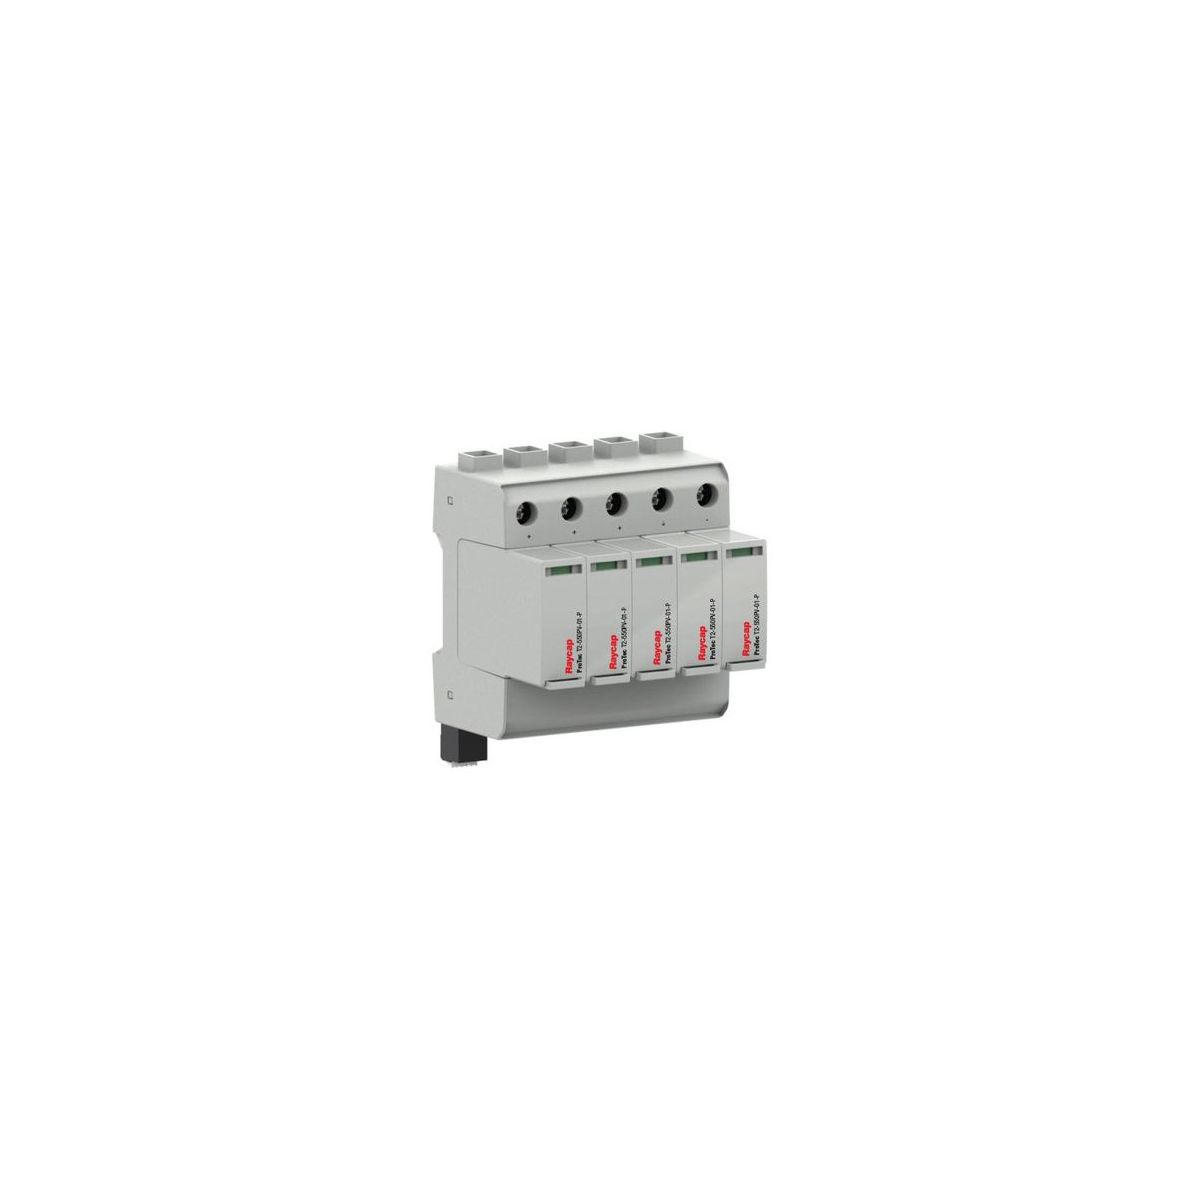 SMA Upgrade kit DC surge protector (type I+II) for series STP xx-50 DC_SPD_KIT7_T1T2